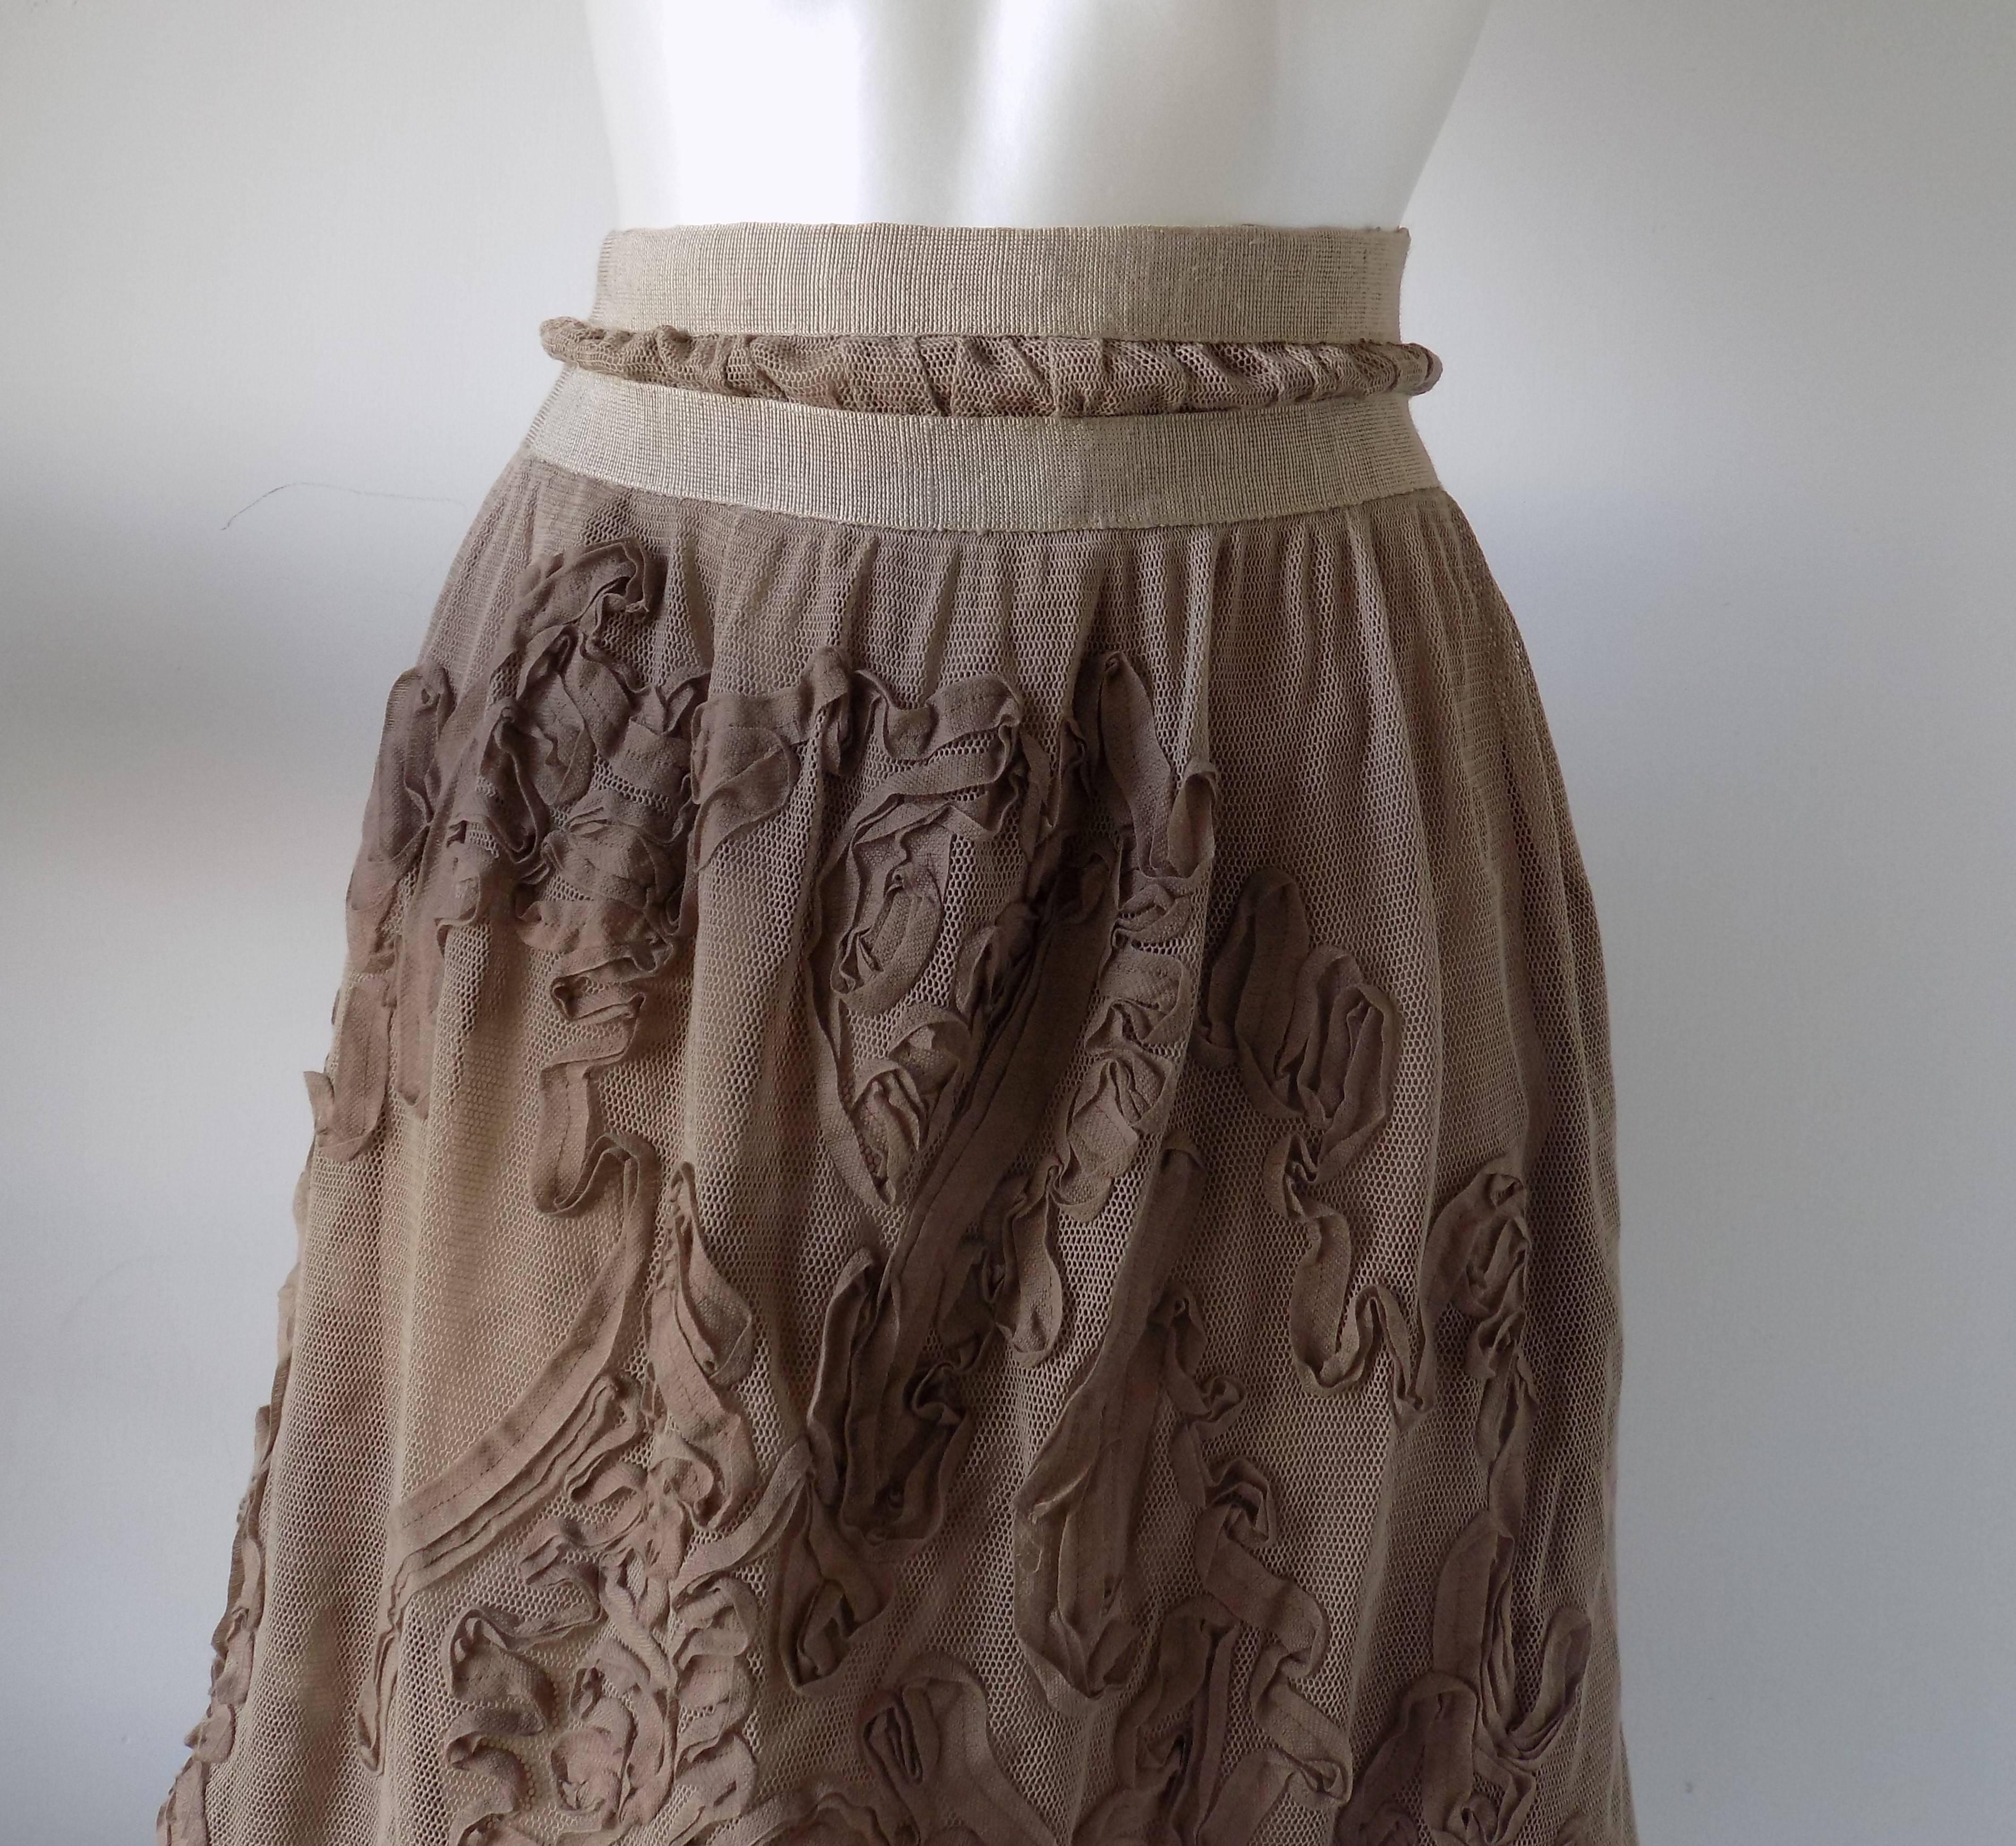 1980s Philosophy by Alberta Ferretti light brown / nude skirt NWOT

Made in italy

Size: italian 44 

Composition: 100 % cotton